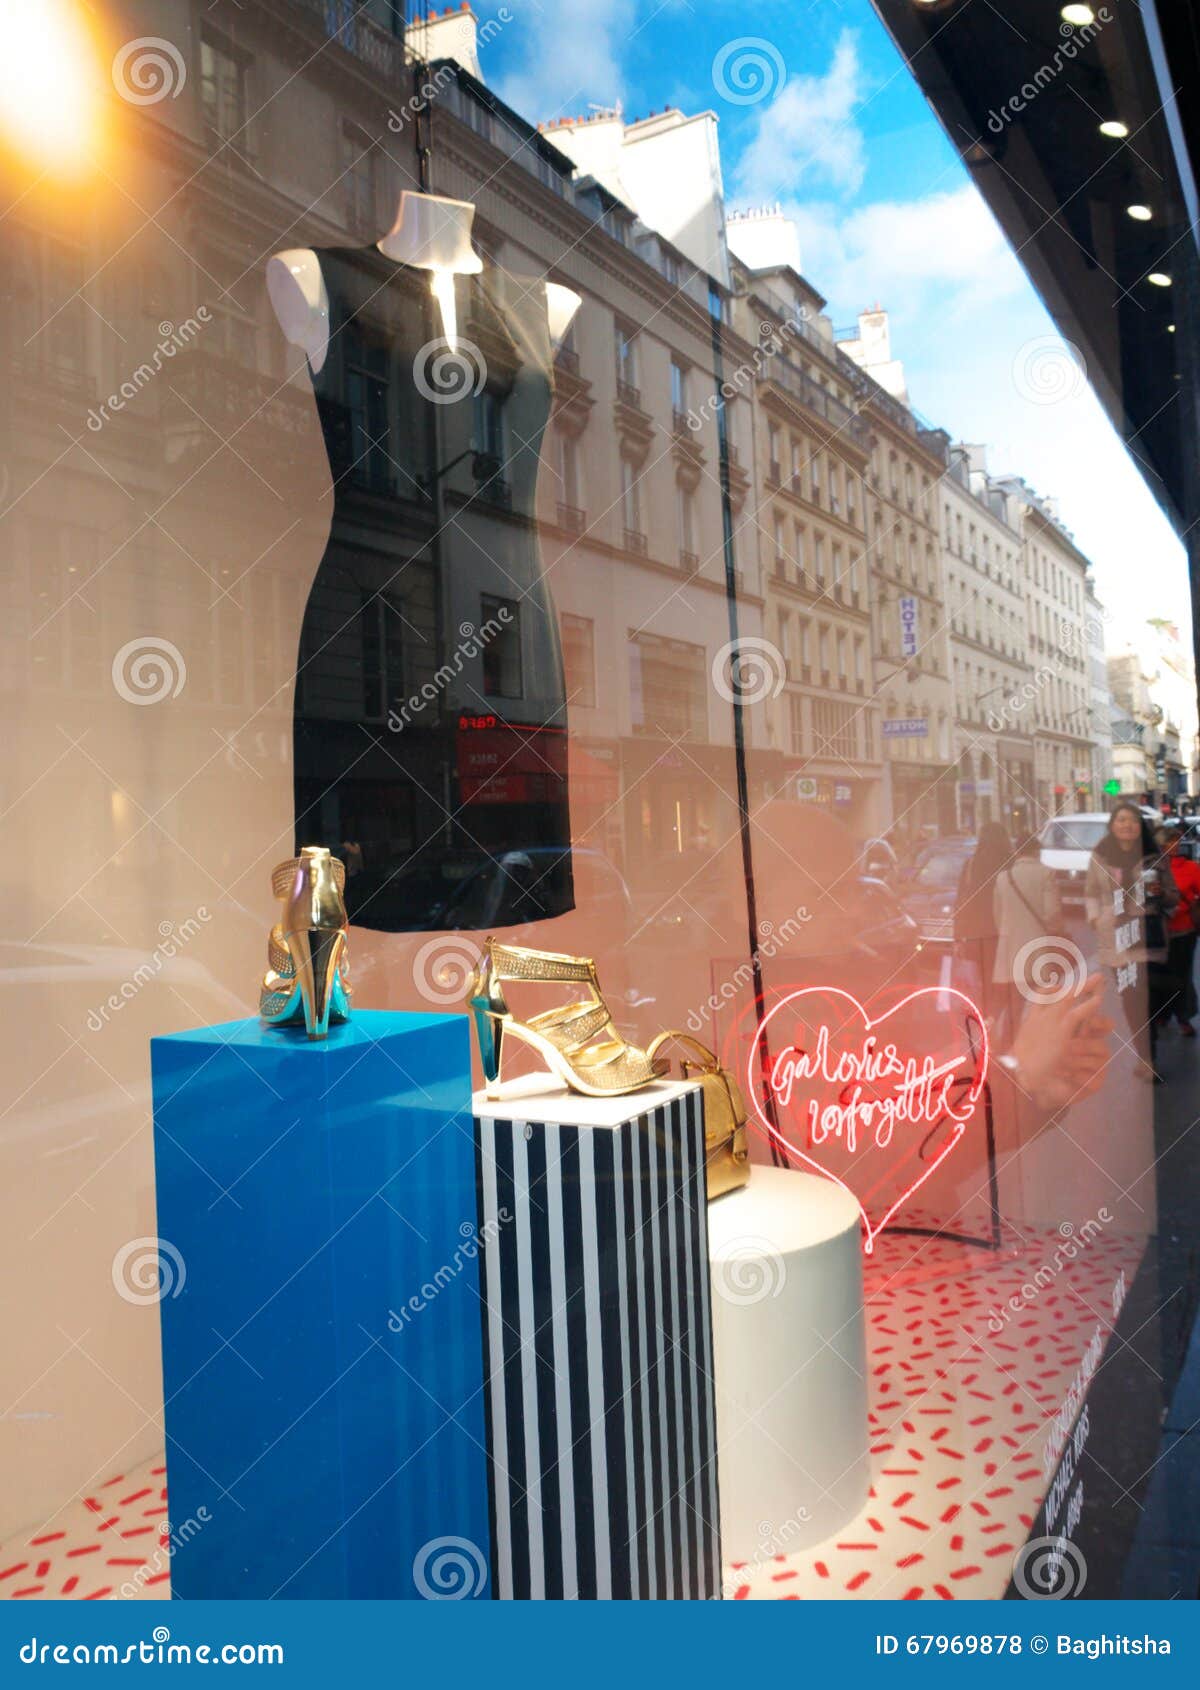 Michael Kors Boutique in La Vallee Village Editorial Stock Image  Image  of clothing michael 98119189